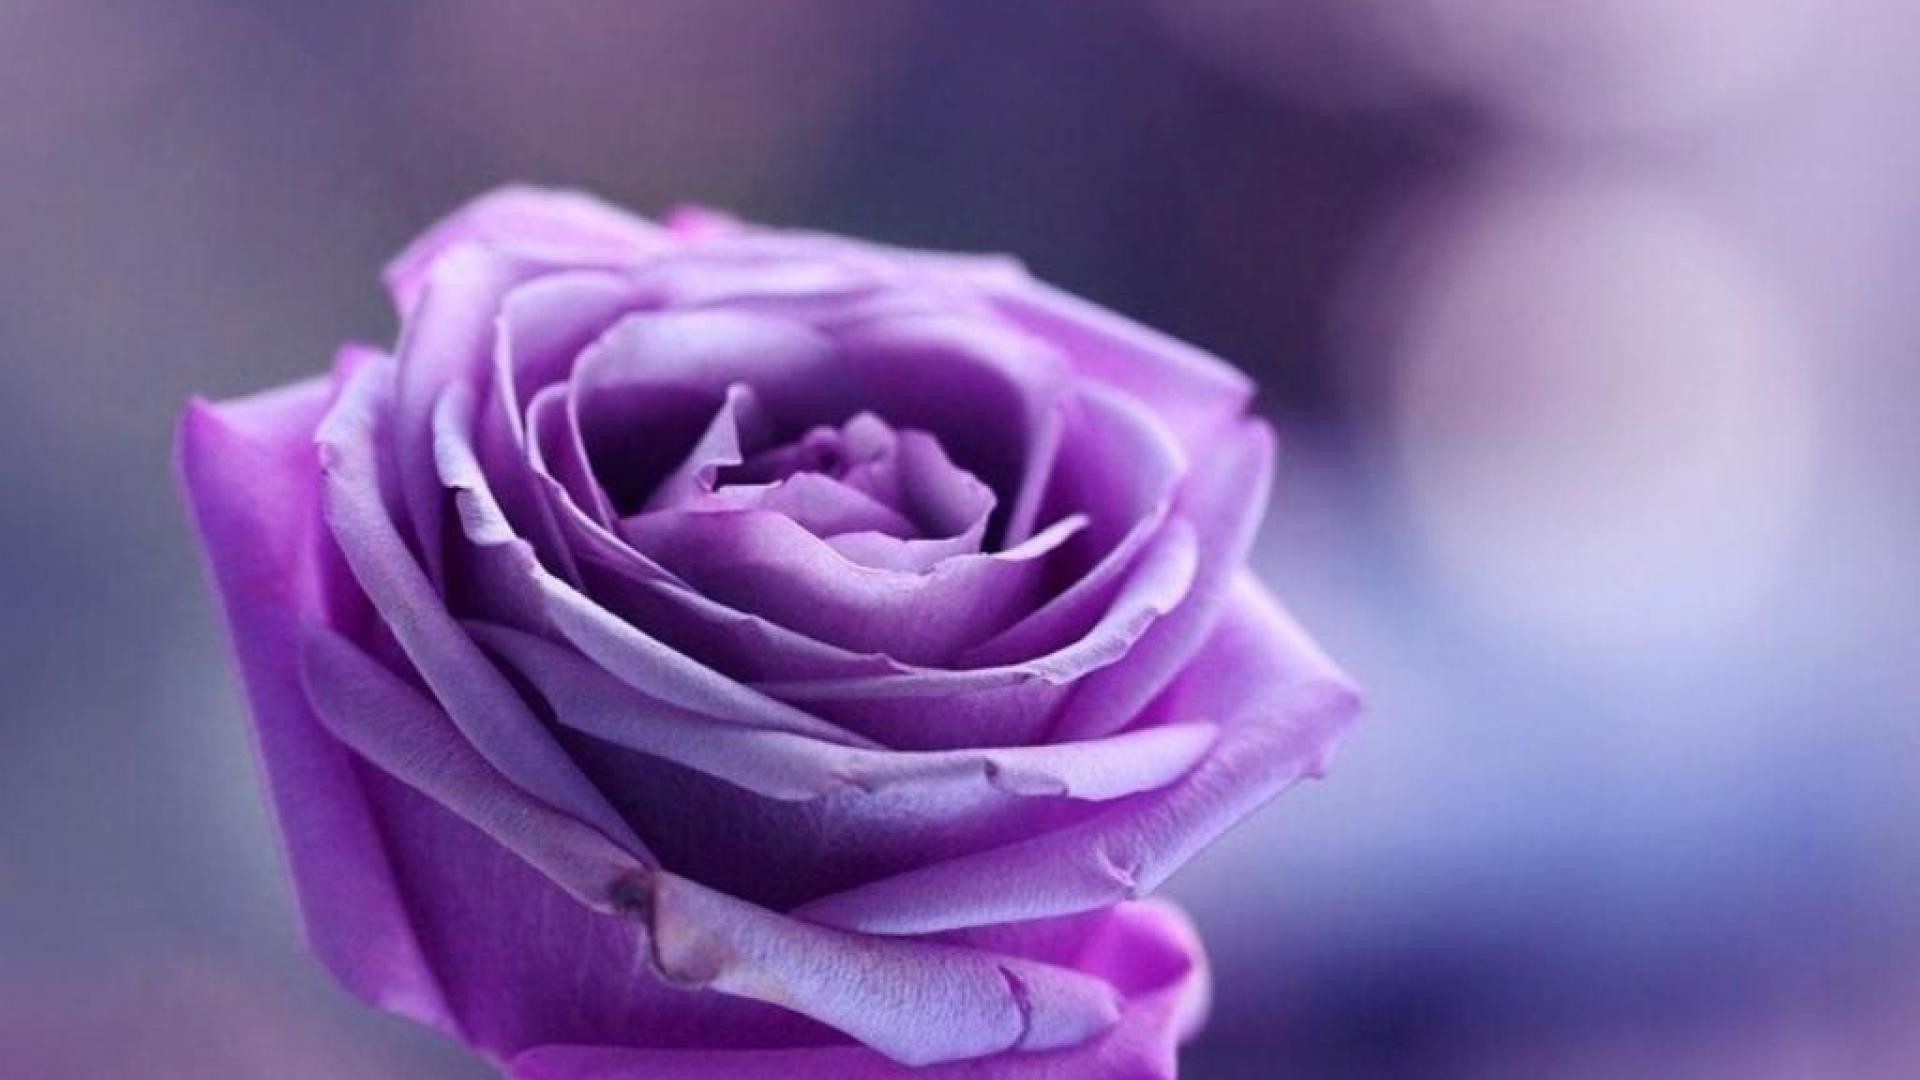 1920x1080 Purple rose on purple background wallpapers and images .